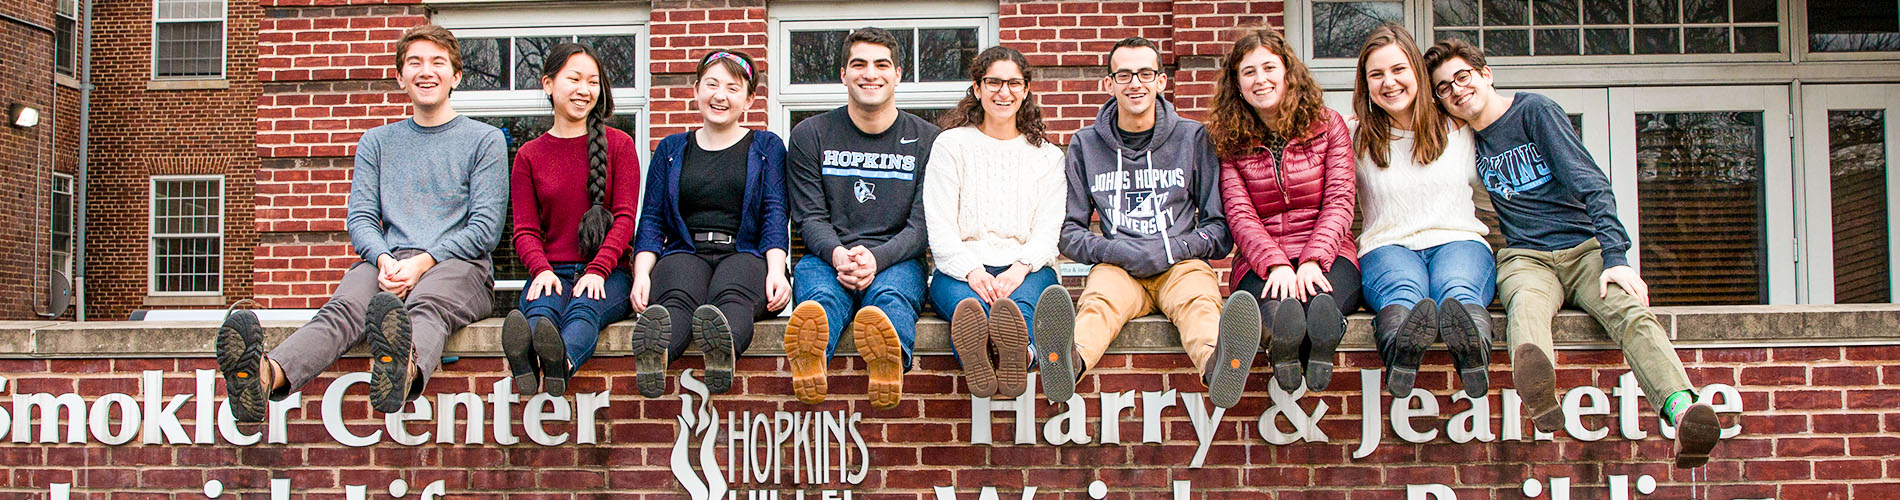 Students smiling in front of Hopkins Hillel